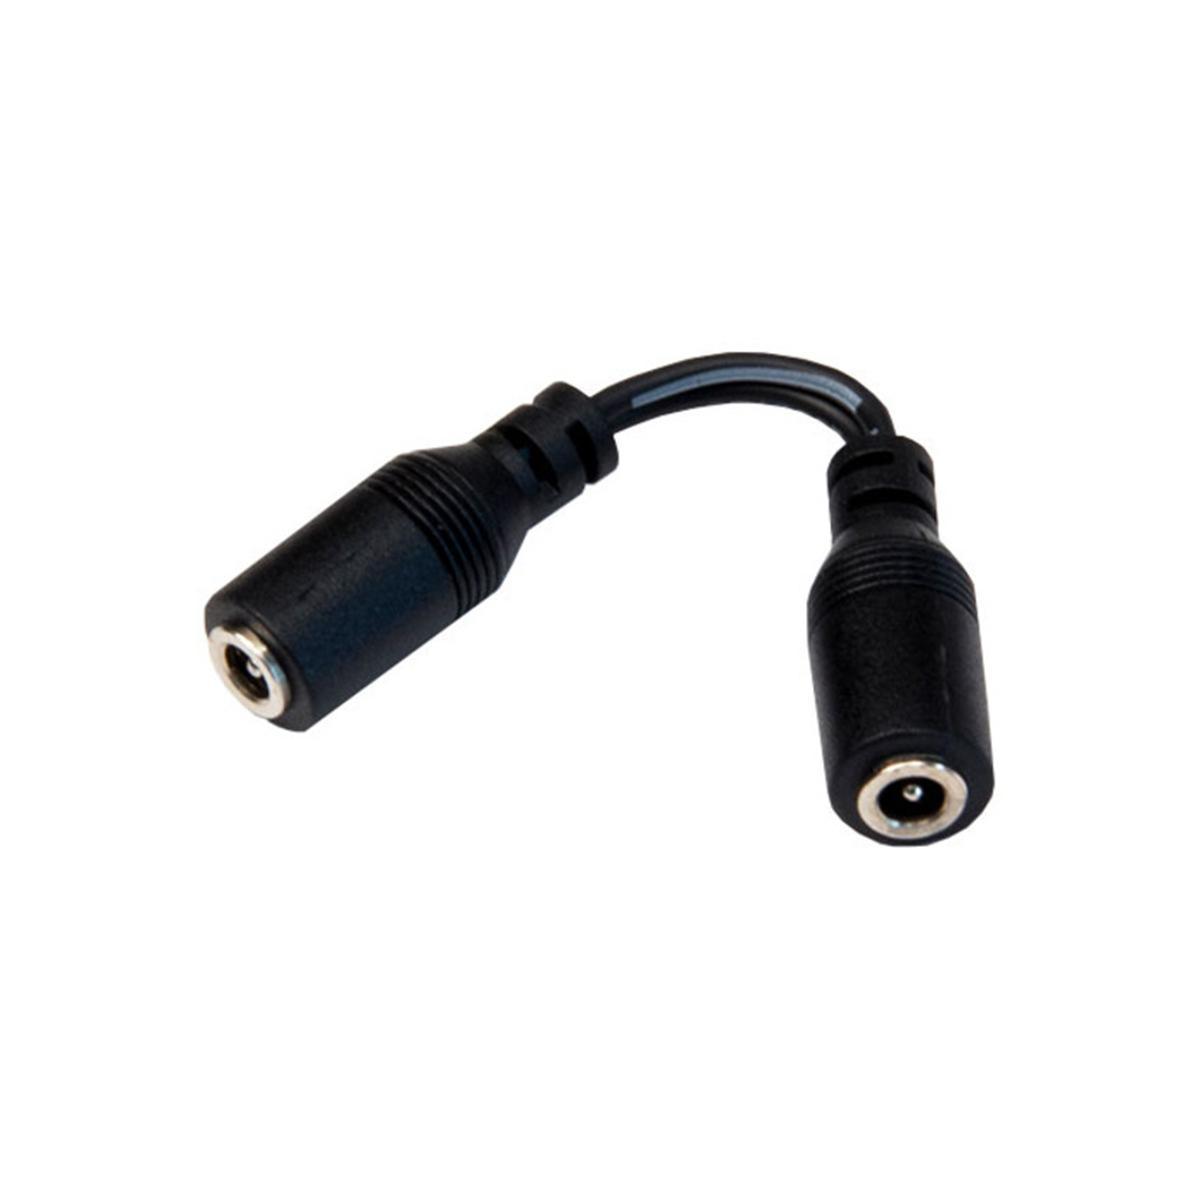 3in. female to female Cable Connector For GM Under Cabinet Lighting, Black - Bees Lighting